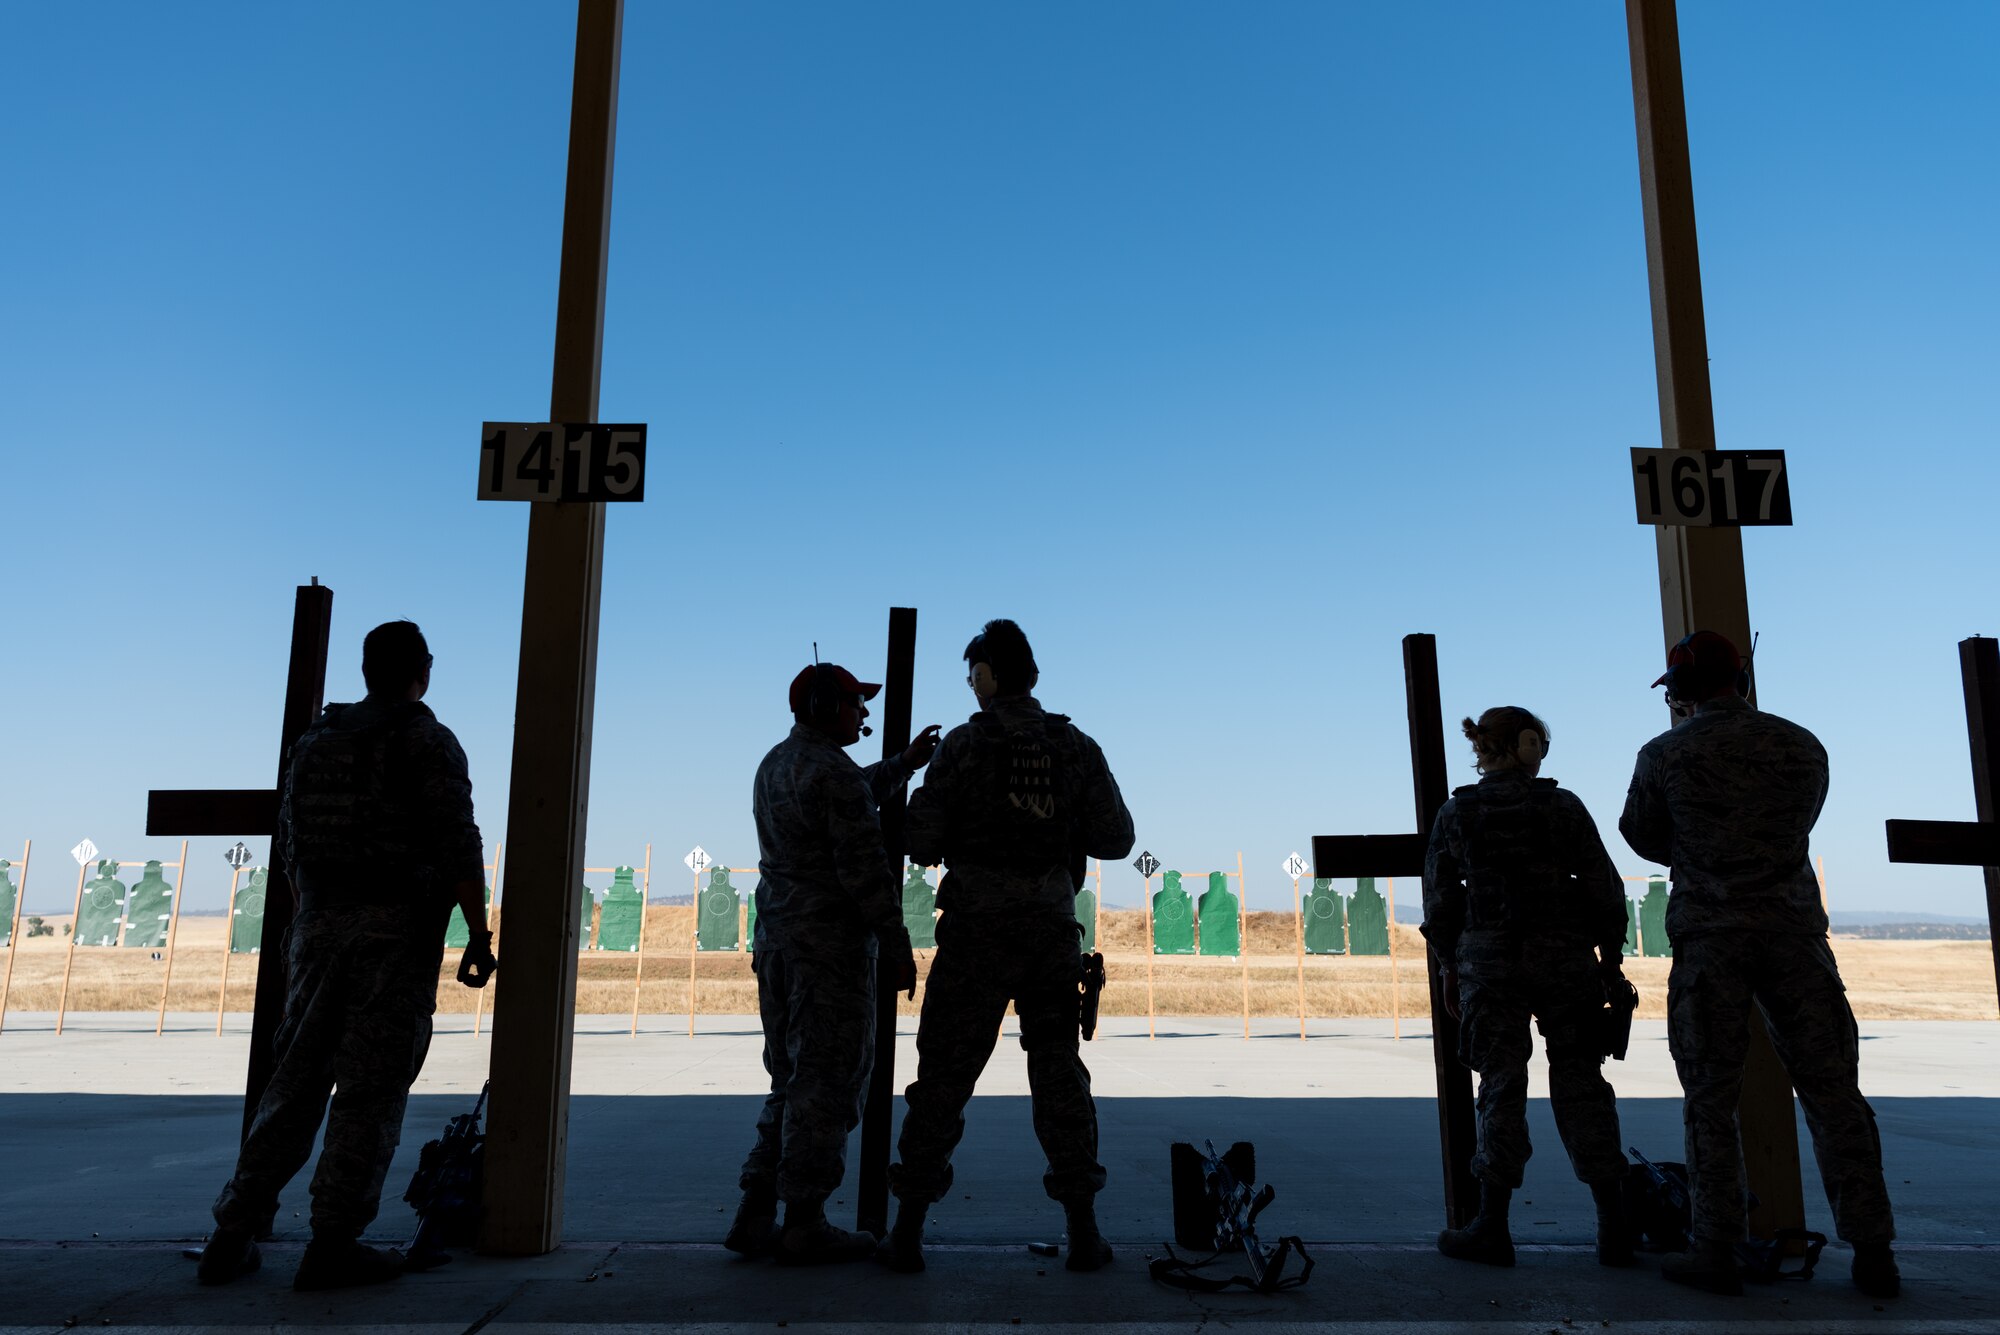 Airmen with the 9th and 940th Security Forces combat arms training and maintenance shop work alongside each other during range instruction at Beale Air Force Base, California, July 7, 2018. Airmen from both the active-duty component and reserves use the same range for qualification. (U.S. Air Force photo by Senior Airman Justin Parsons)